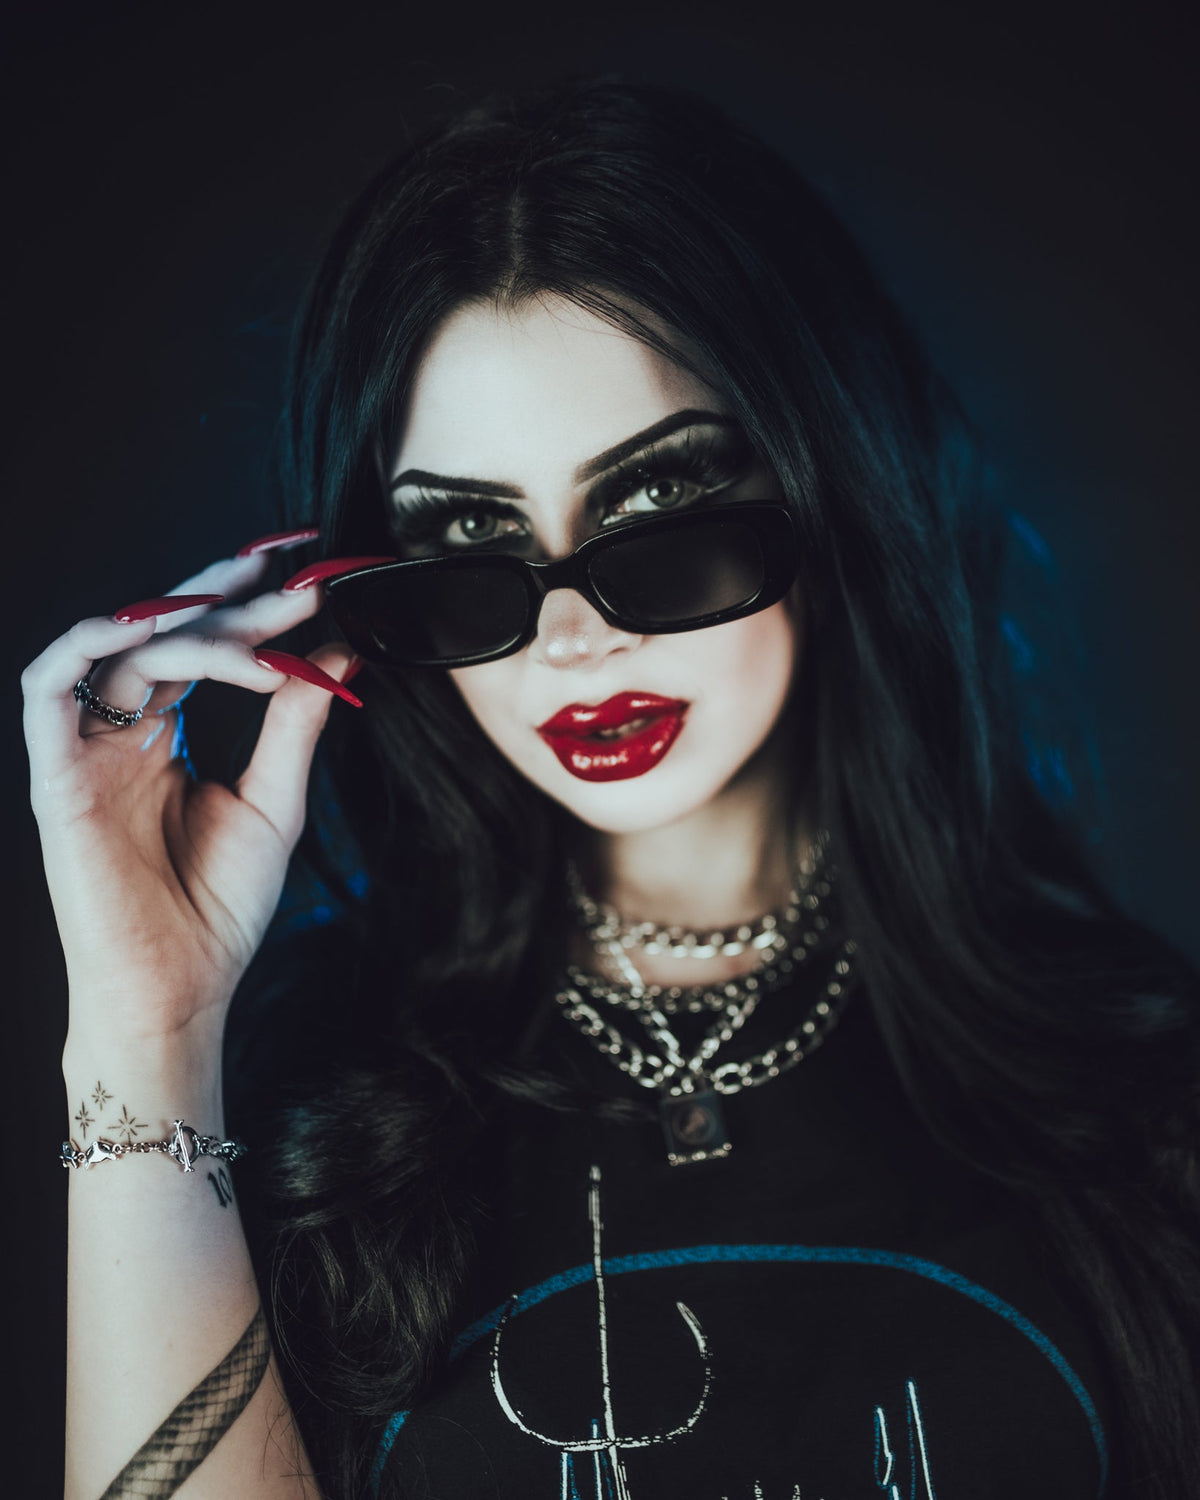 Wicked Lady Sunglasses